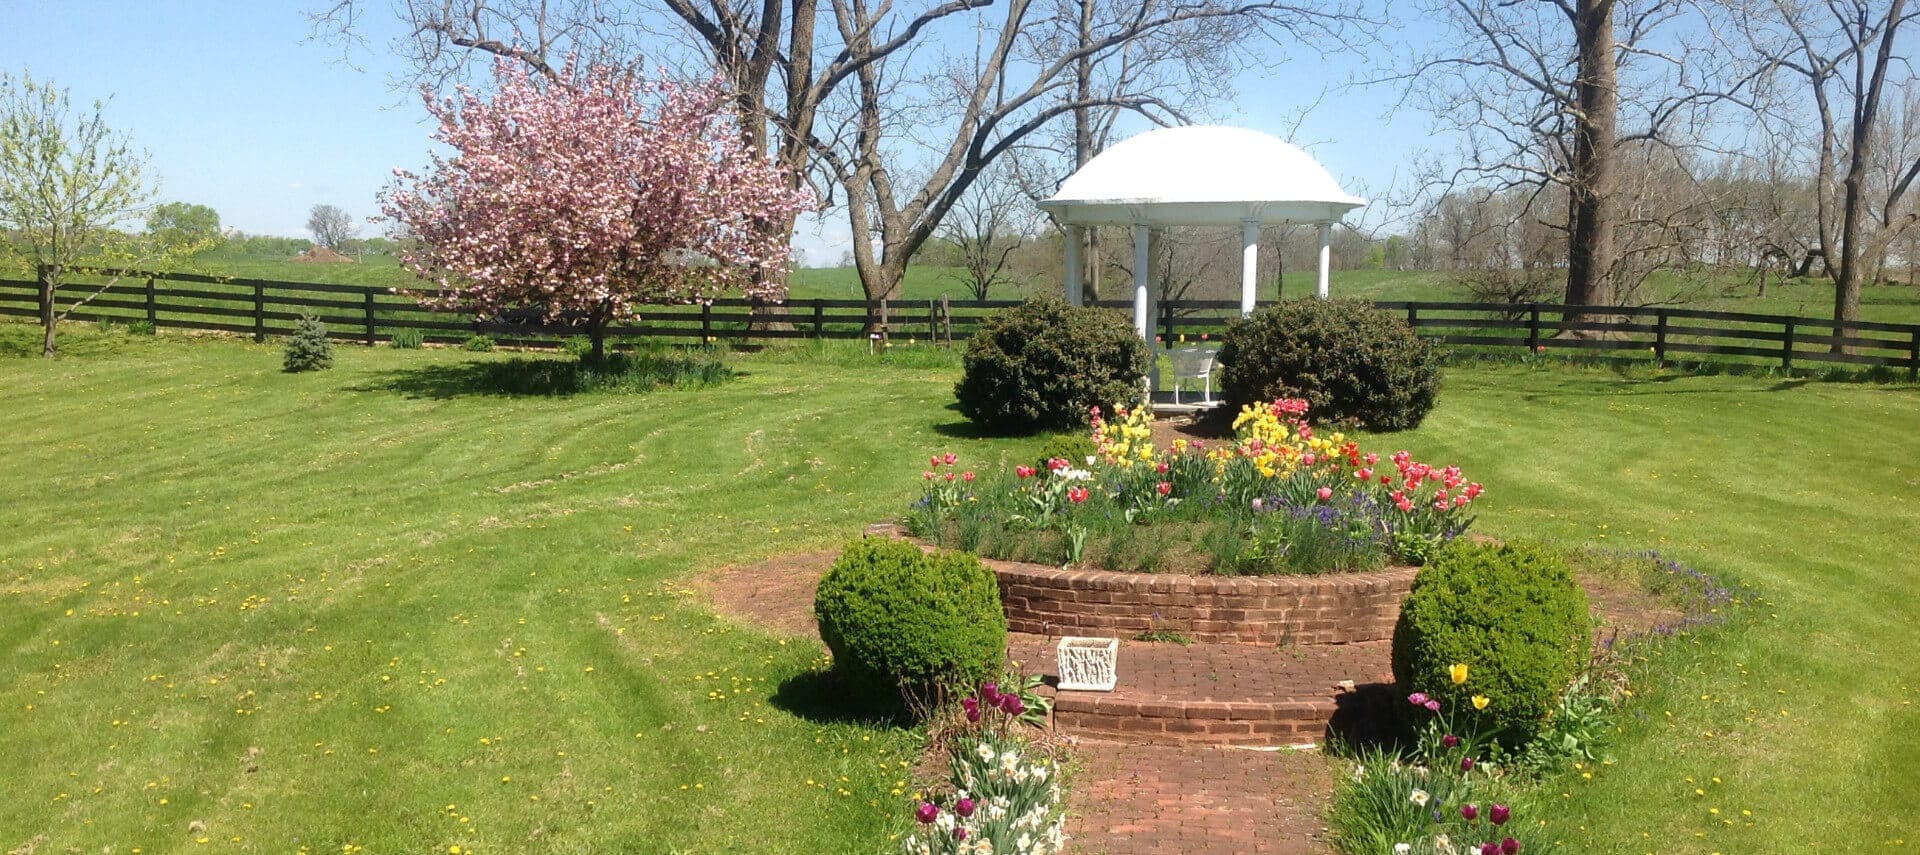 White gazebo in garden with pink blossom tree and colorful flower beds